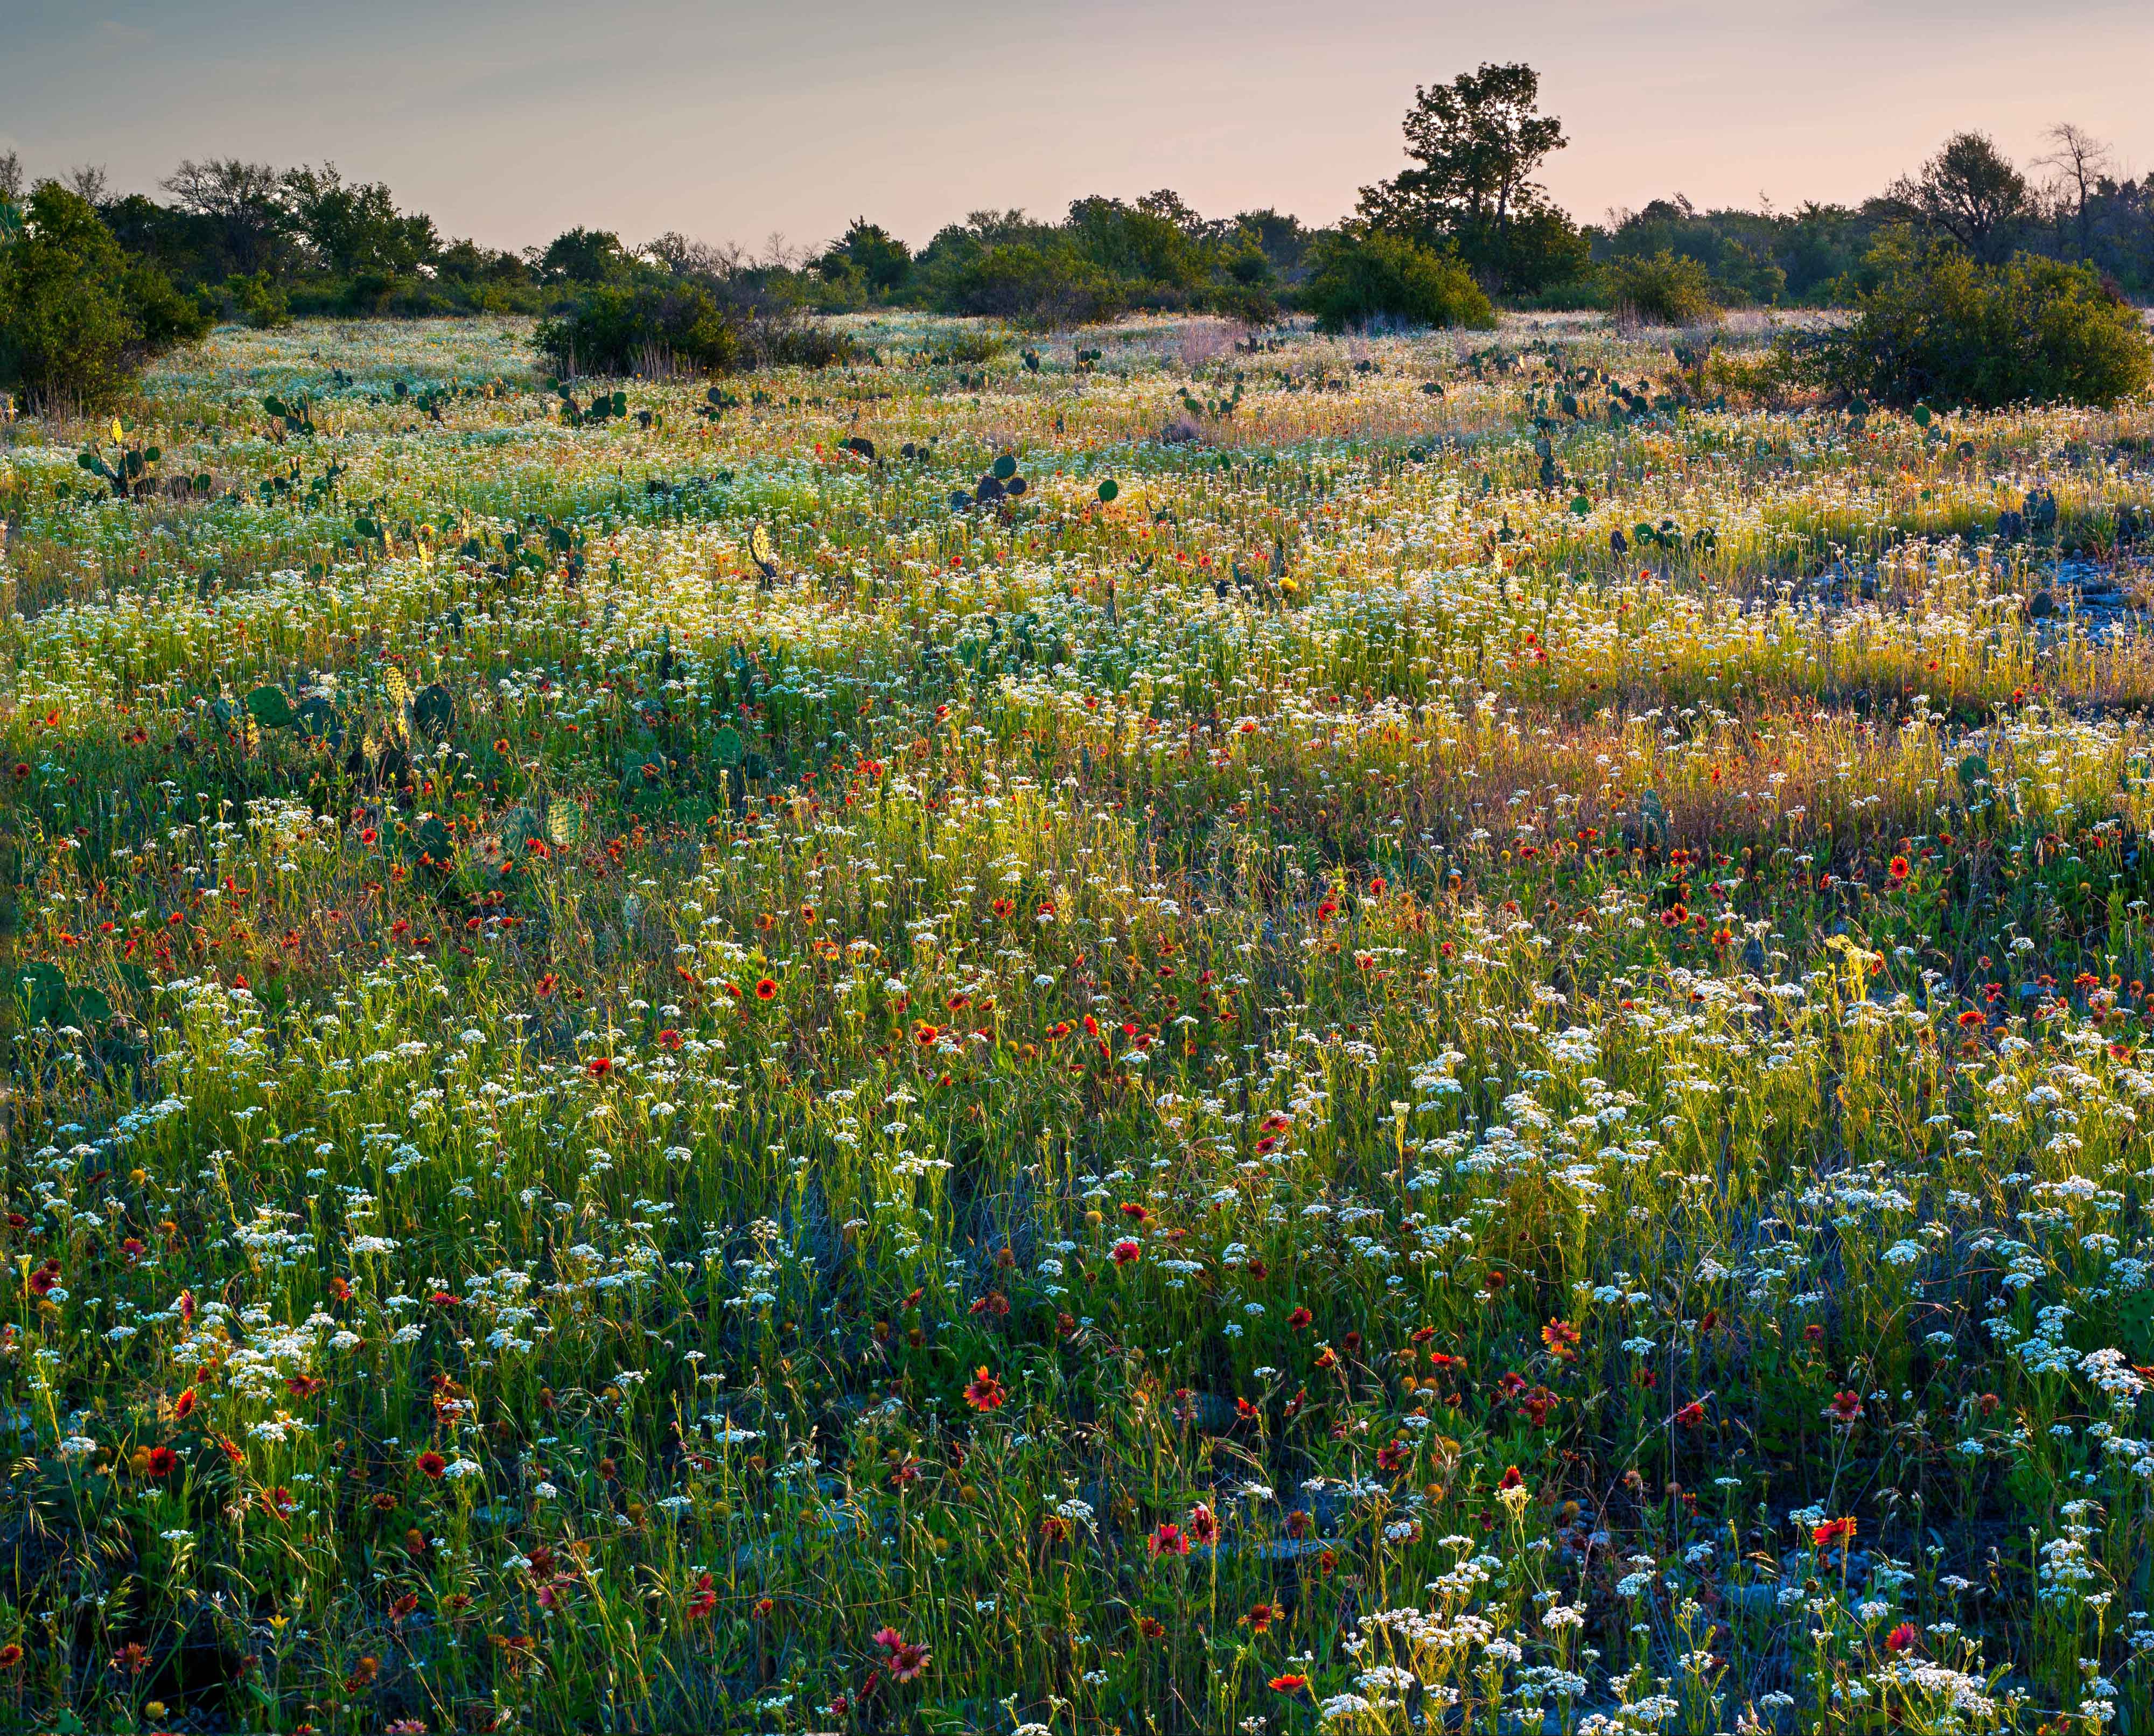 An expansive field of wildflowers with tree groves in the background.